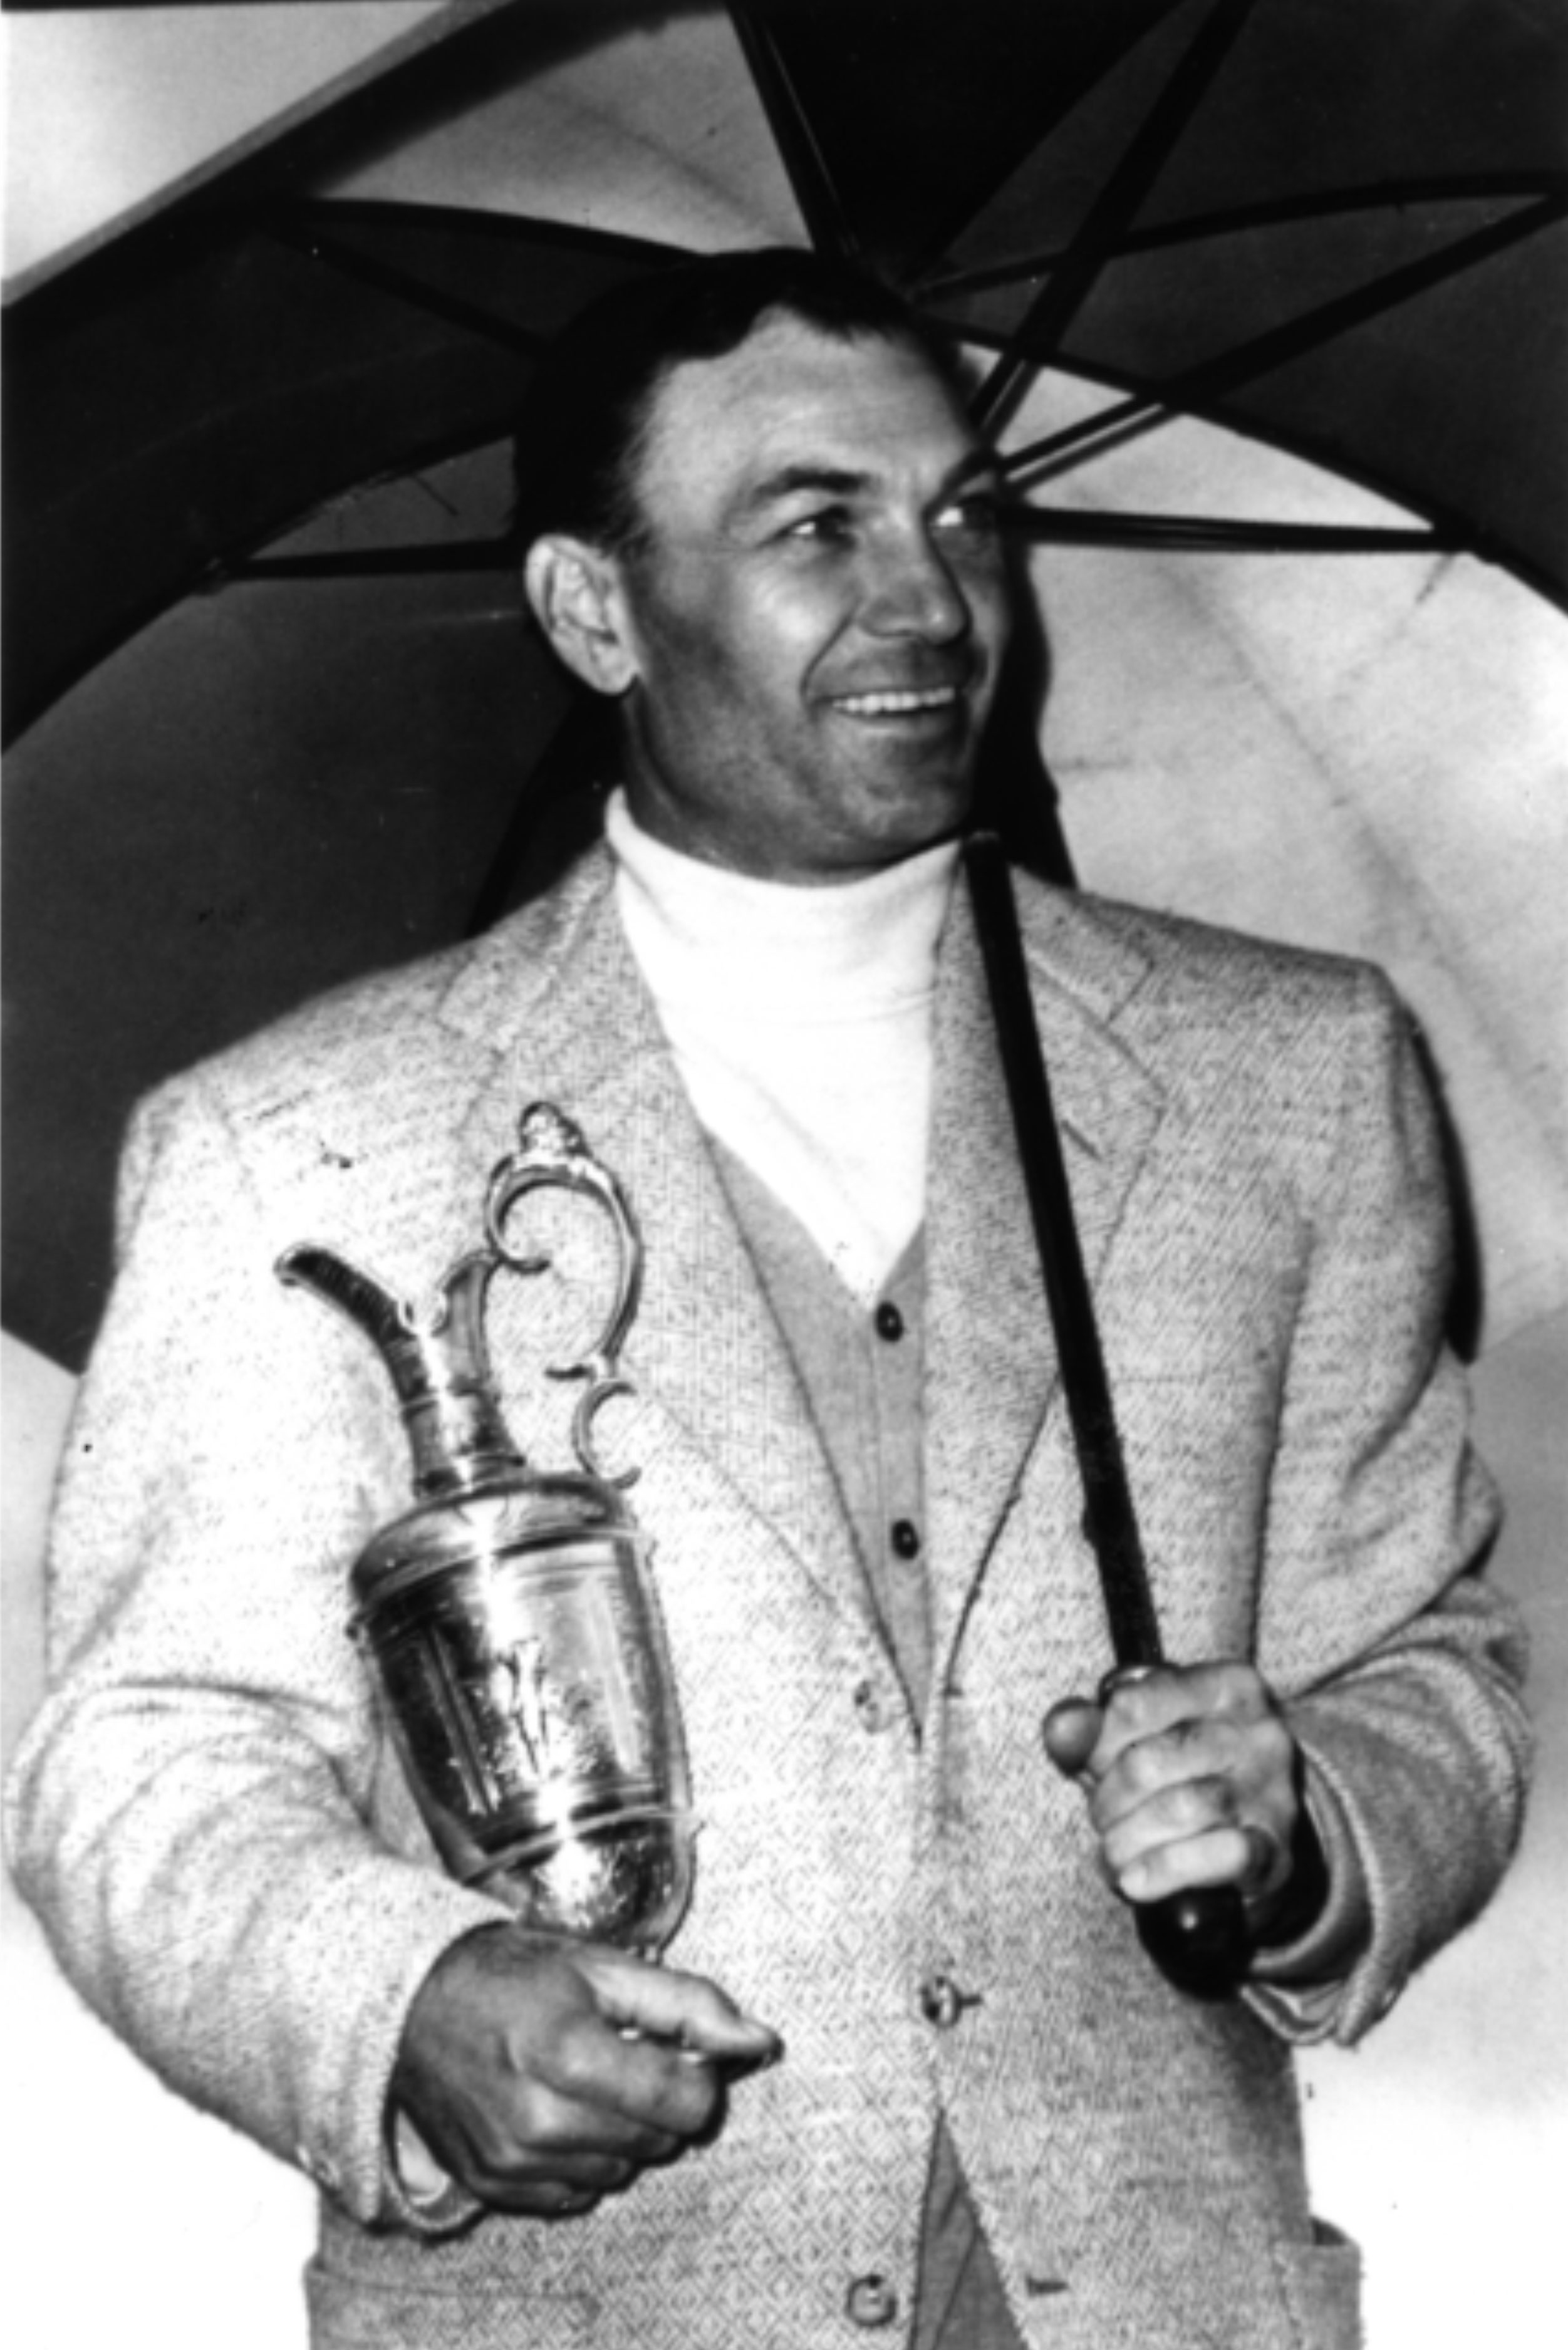 Jul 1953:  Ben Hogan of the USA with the Claret Jug after victory in the British Open at Carnoustie, Scotland.  Mandatory Credit: AllsportUK/Allsport